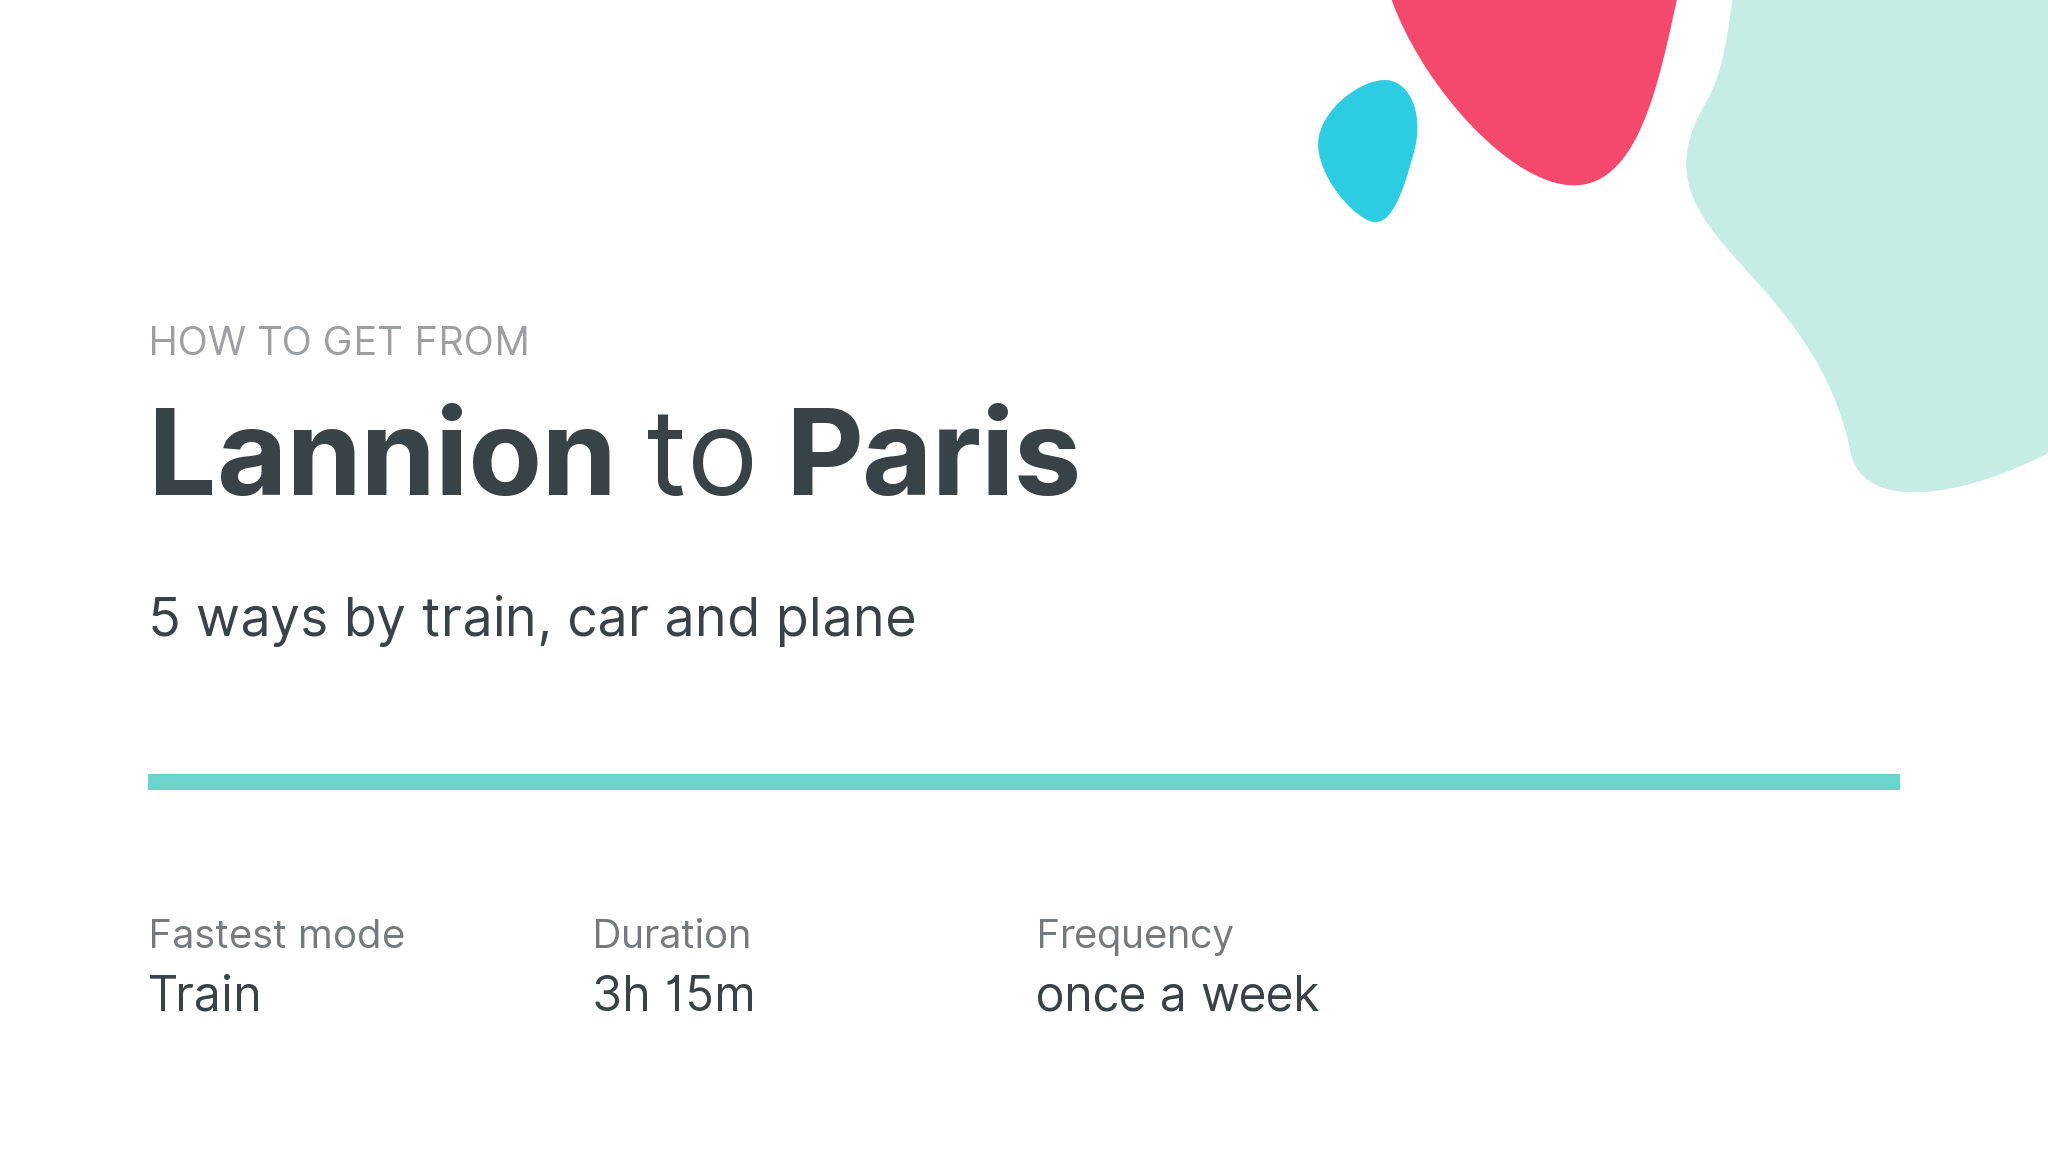 How do I get from Lannion to Paris